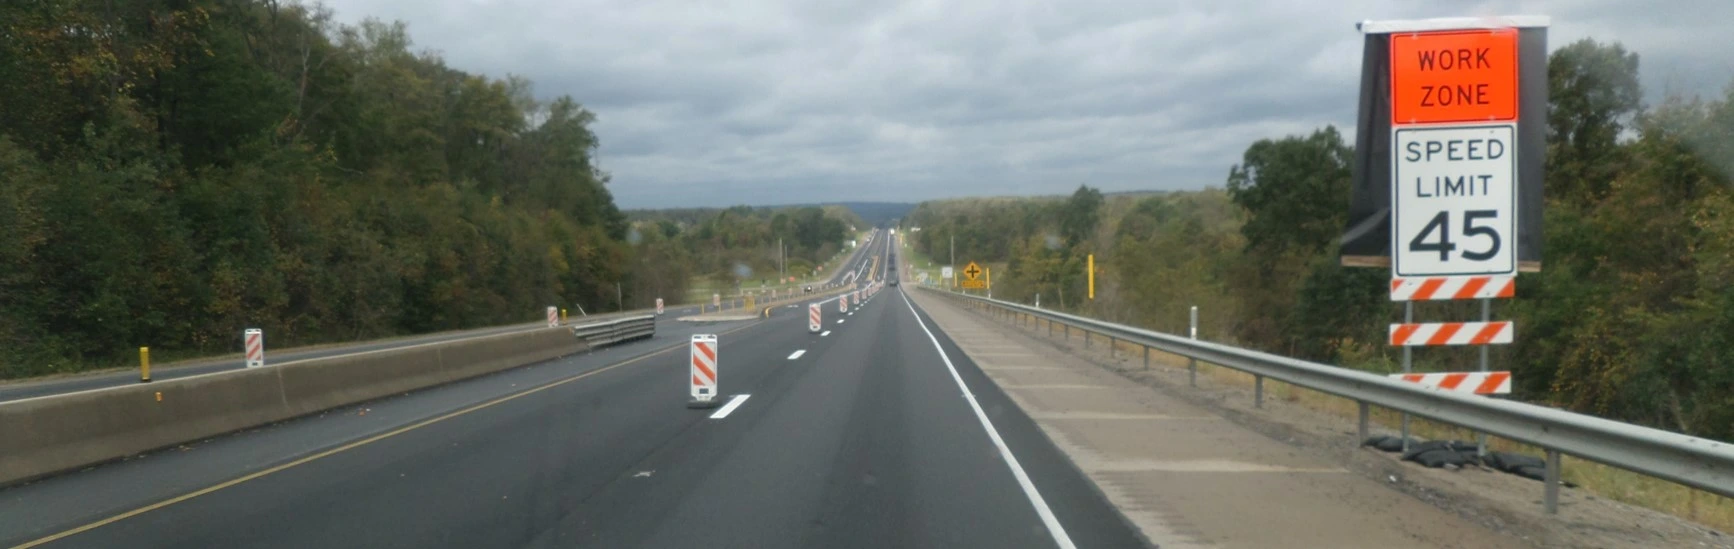 An image showing a blacktop highway with an orange work-zone sign and a white speed limit sign with 45 miles per hour in black letters and numbers, and trees on either side of the road.